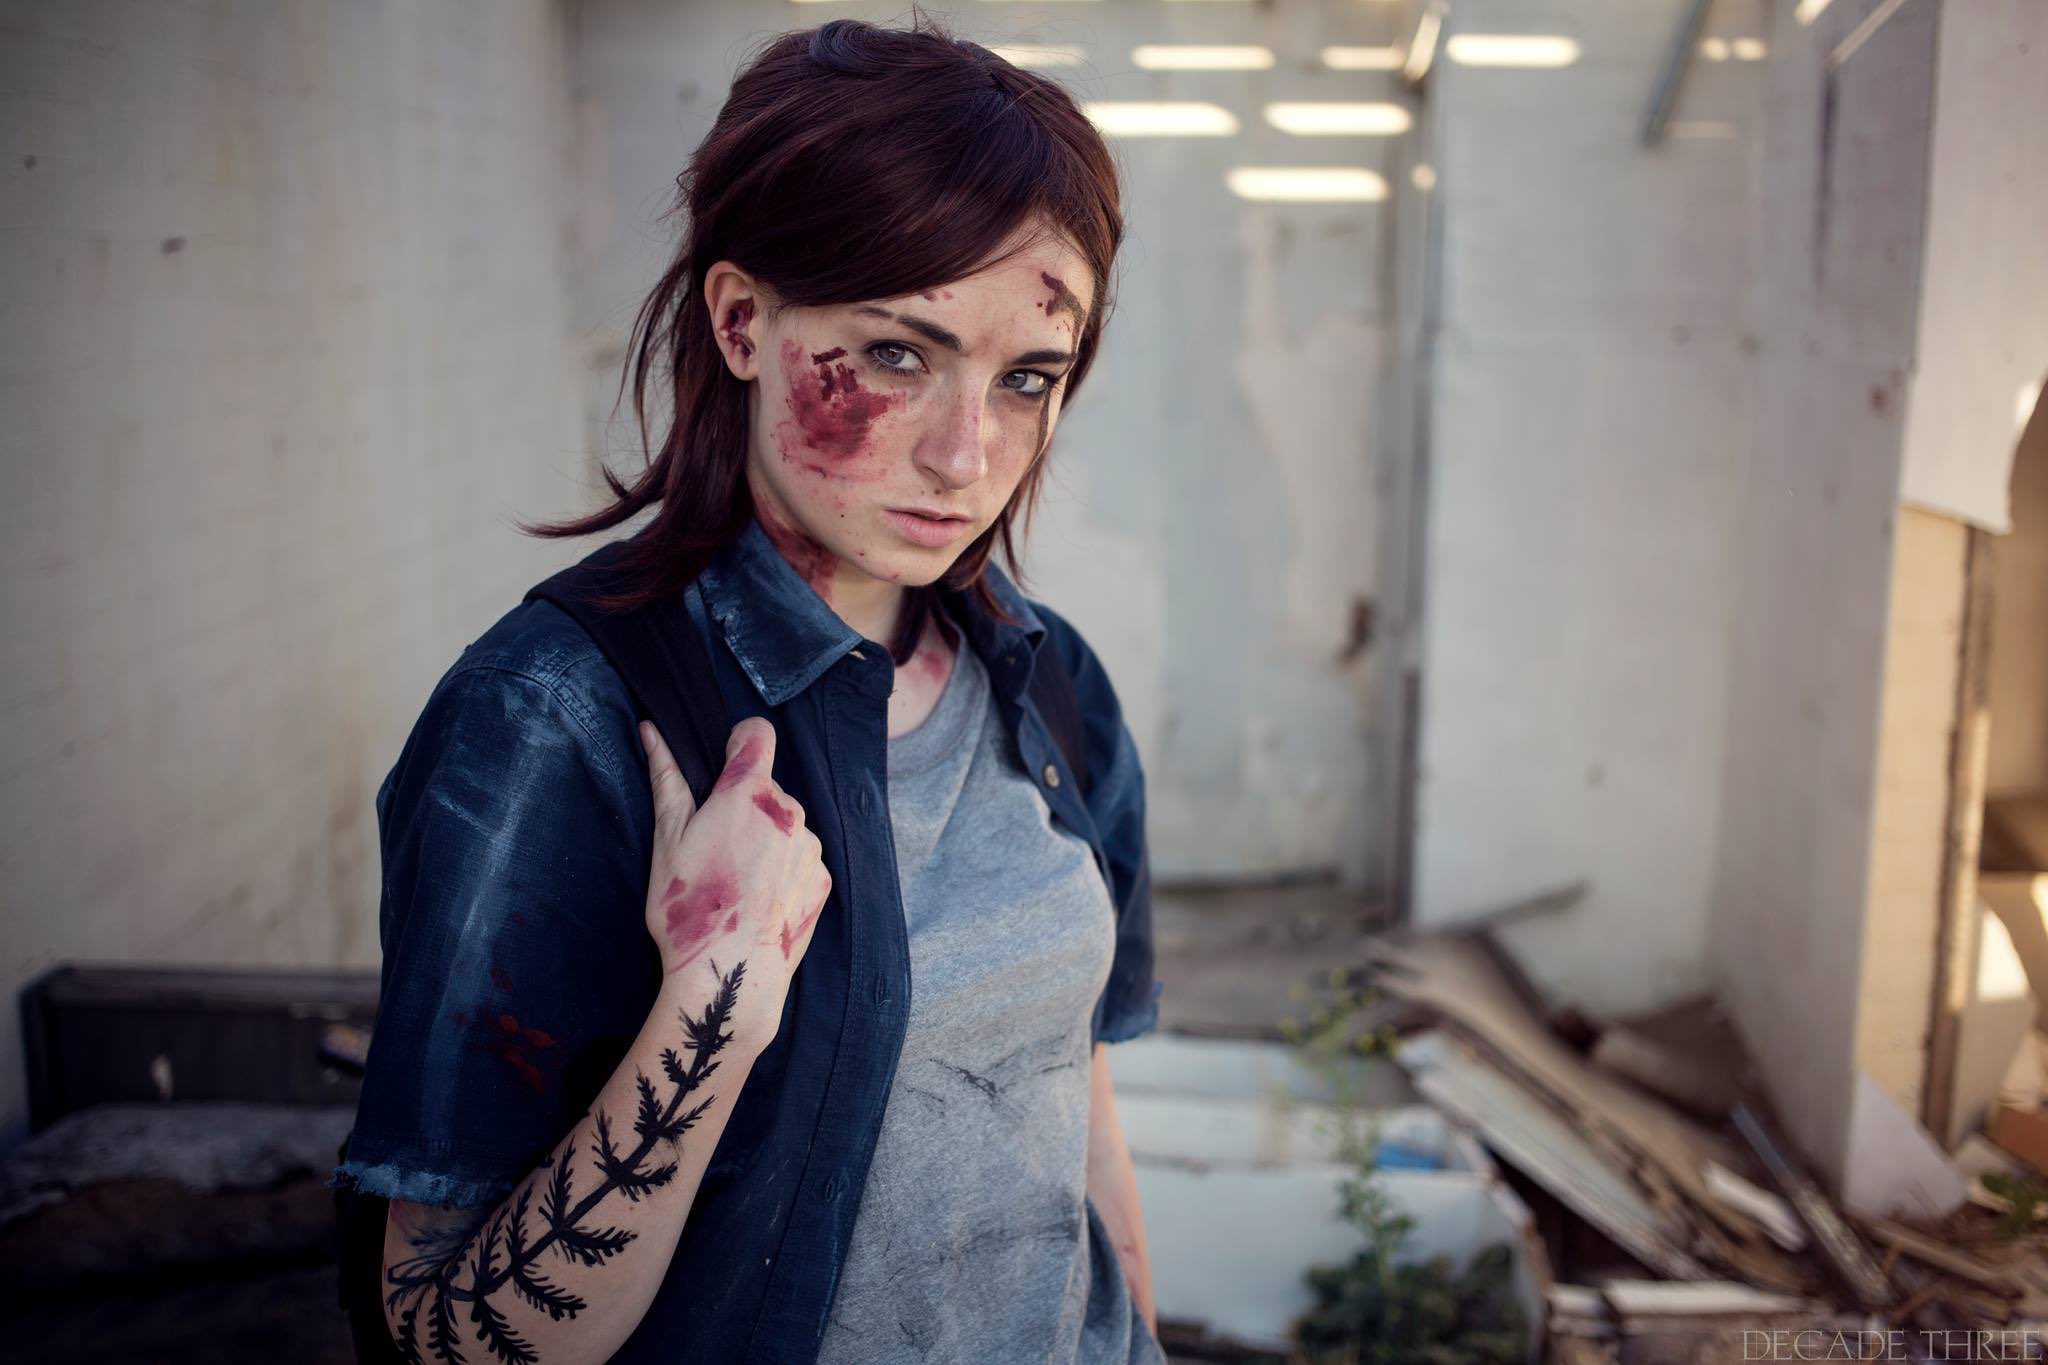 The Last of Us 2 Ellie Temporary Tattoo for Cosplayers, 4